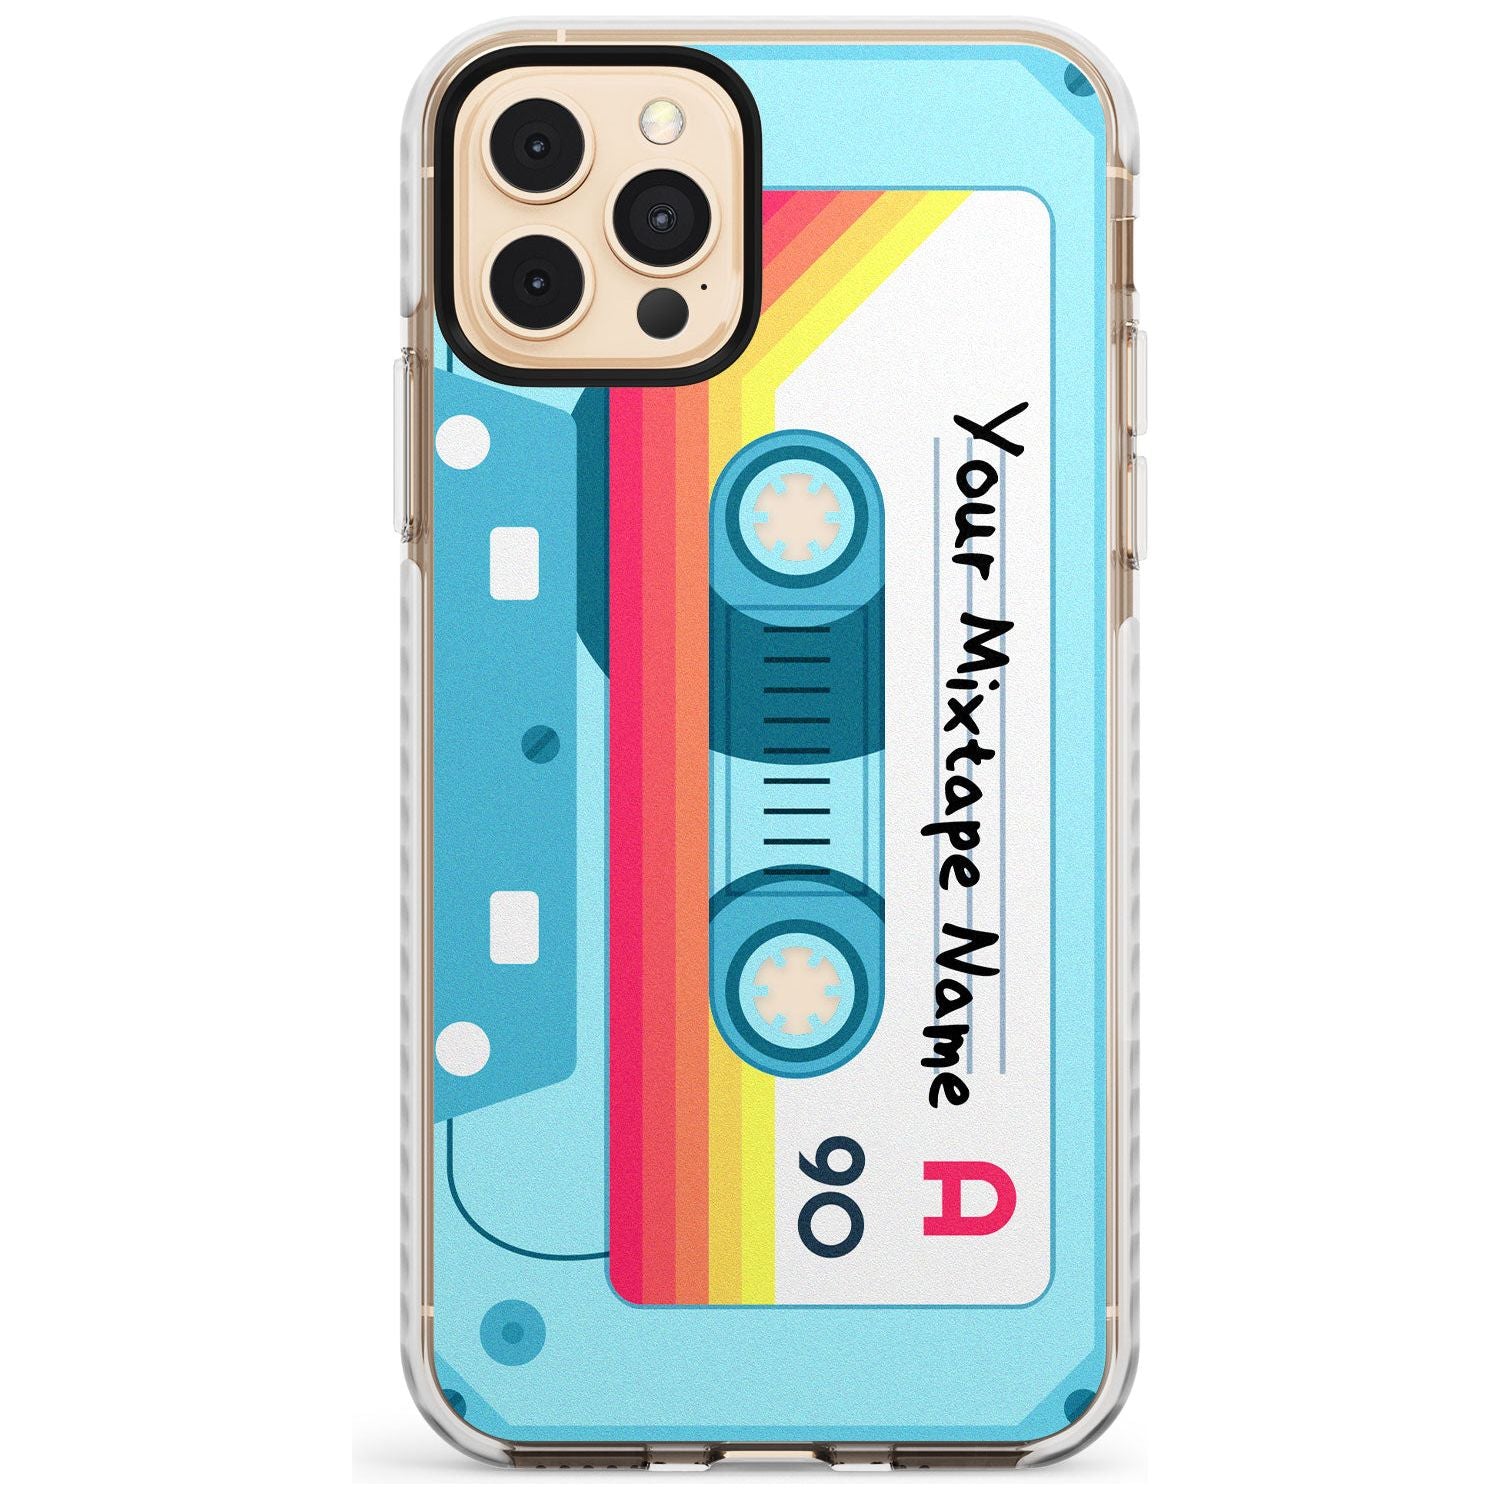 Sporty Cassette Slim TPU Phone Case for iPhone 11 Pro Max